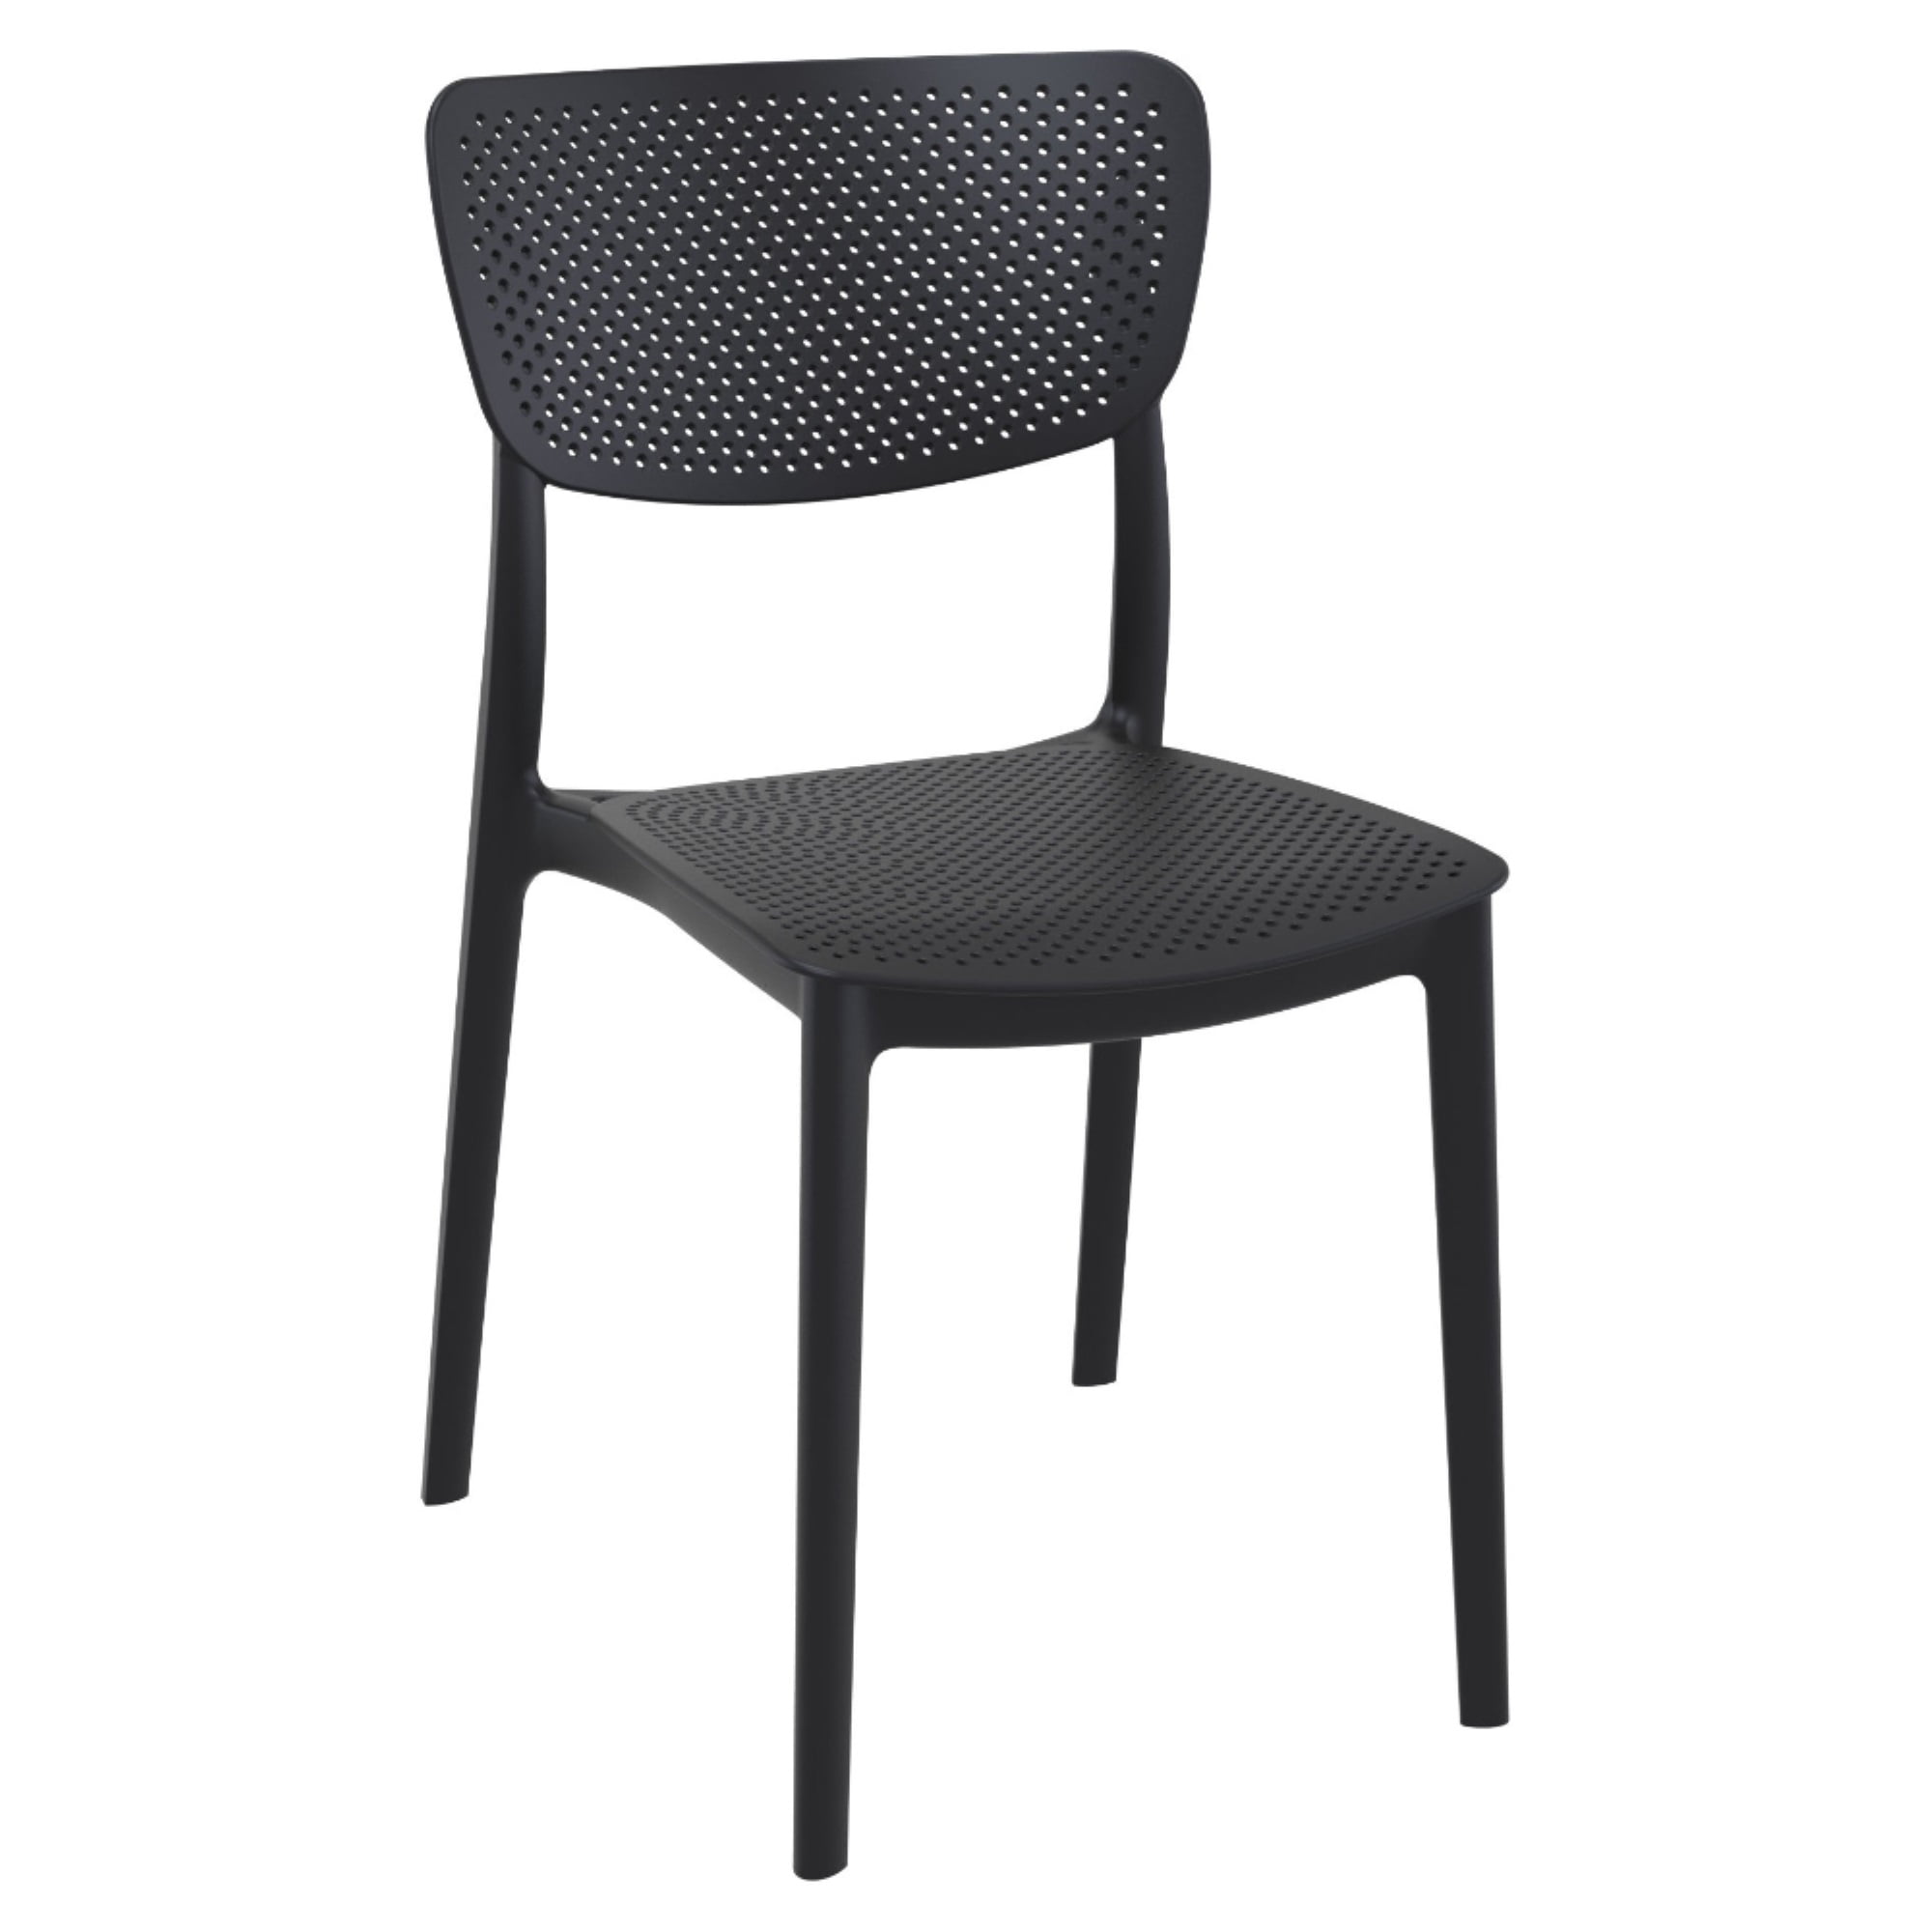 Isp129-bla Lucy Outdoor Dining Chair - Black